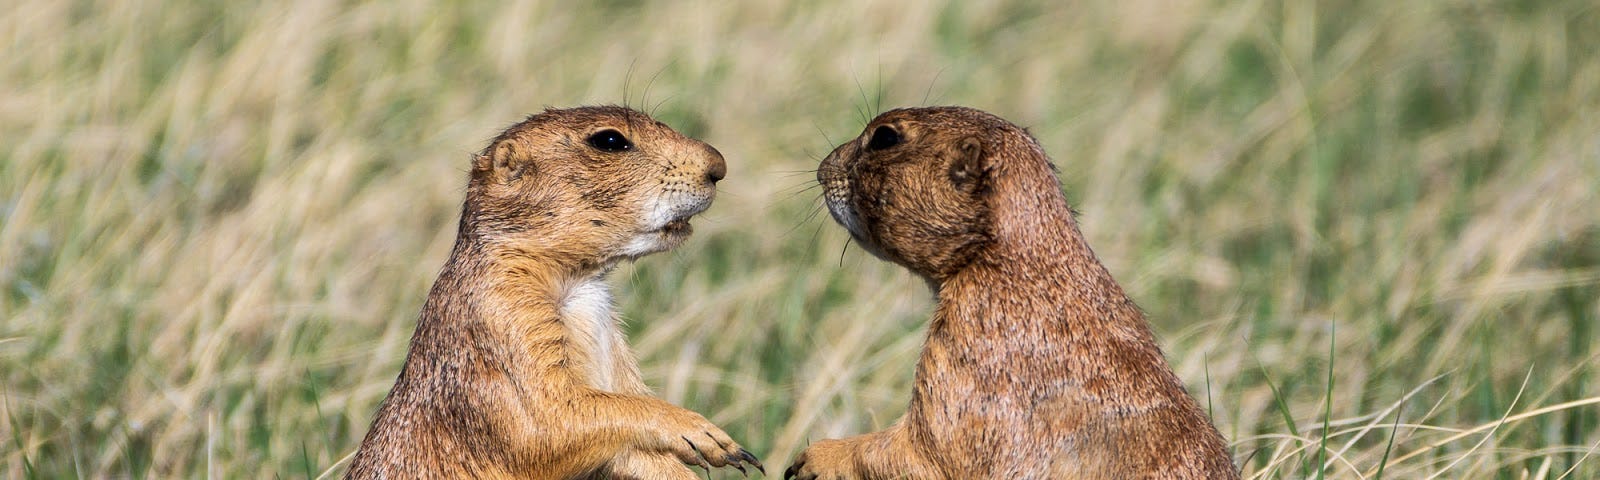 Could these prairie dogs be having a conversation? Photo by the author.